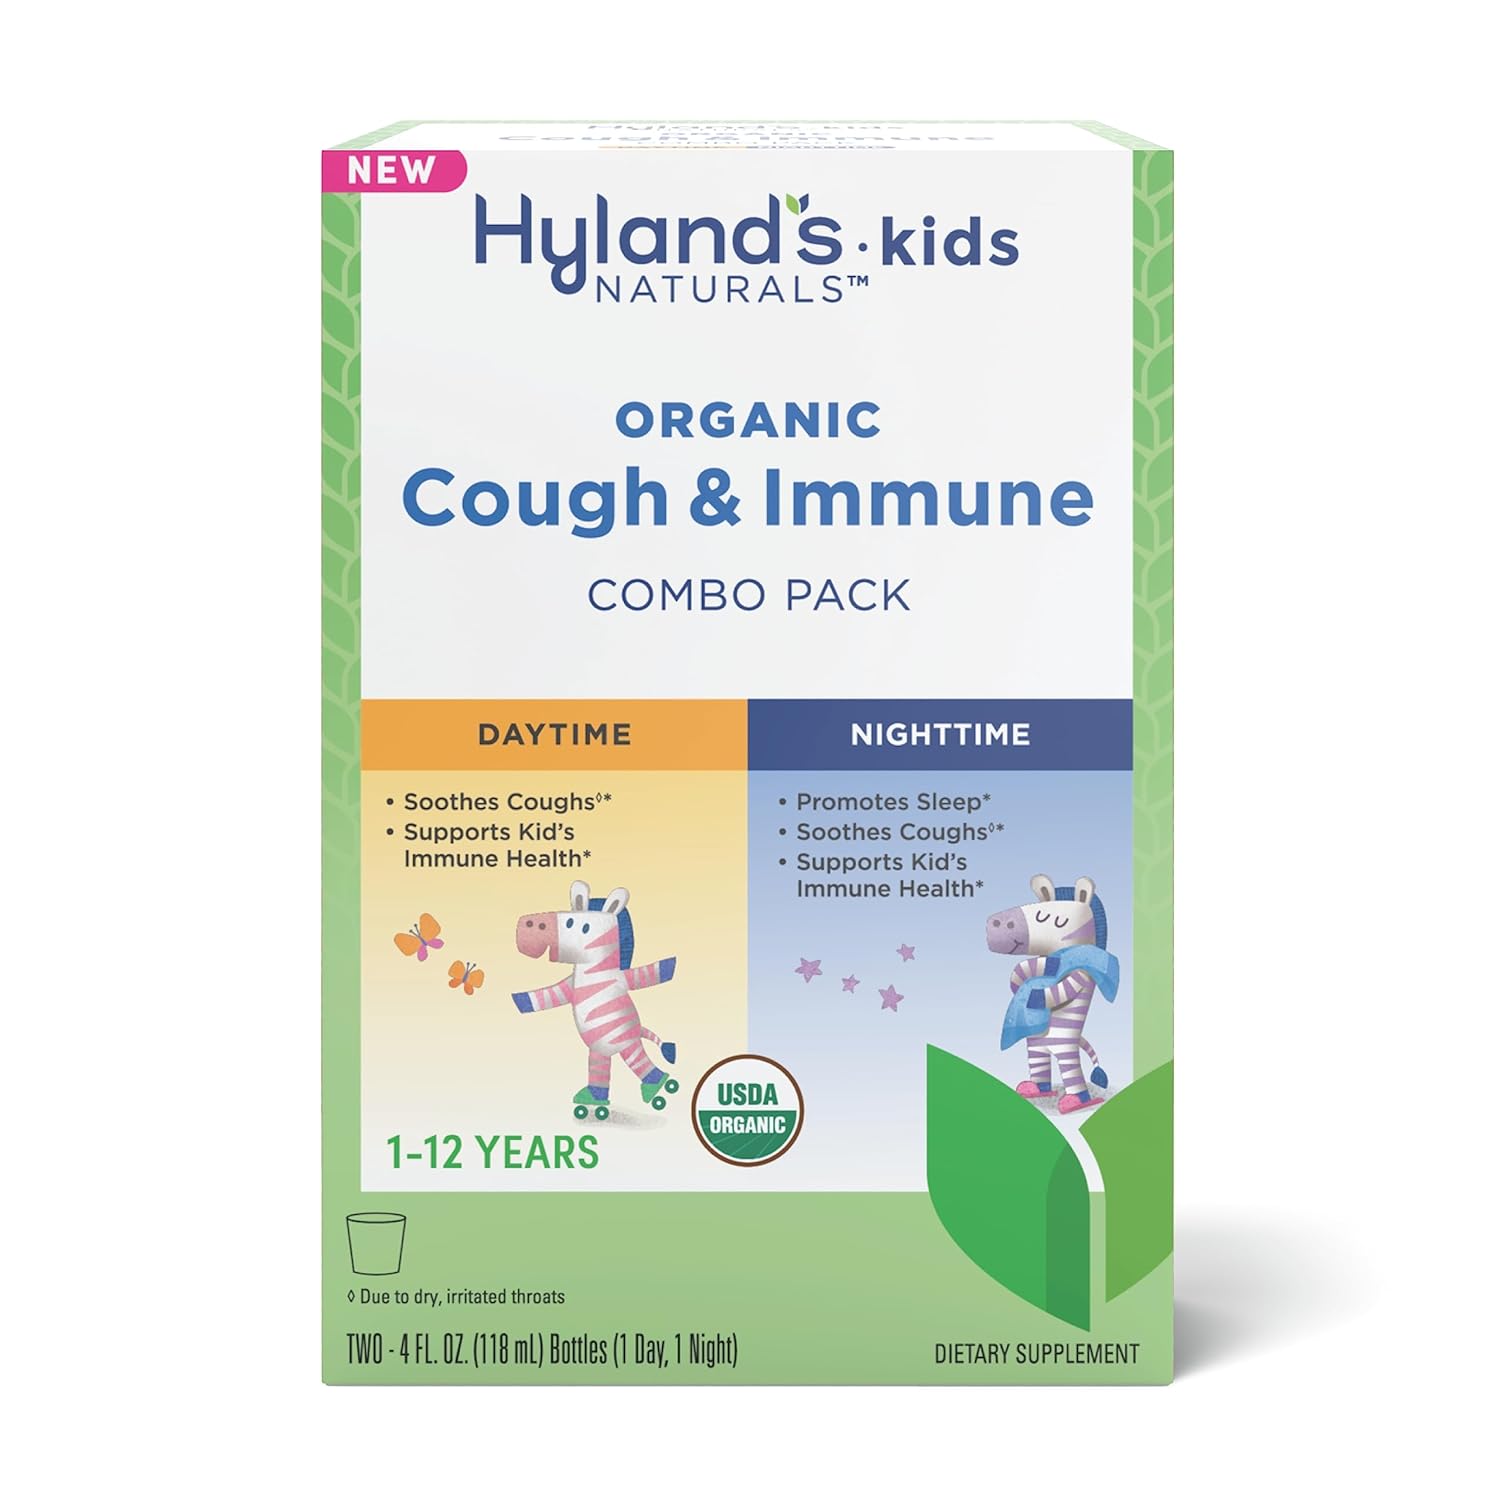 Hyland's Naturals - Kids - Organic Cough & Immune Day & Night Combo Pack - Eases Coughs, Supports Immunity, Promotes Sleep, Two 4 Fl Oz. Bottles (8 fl oz)